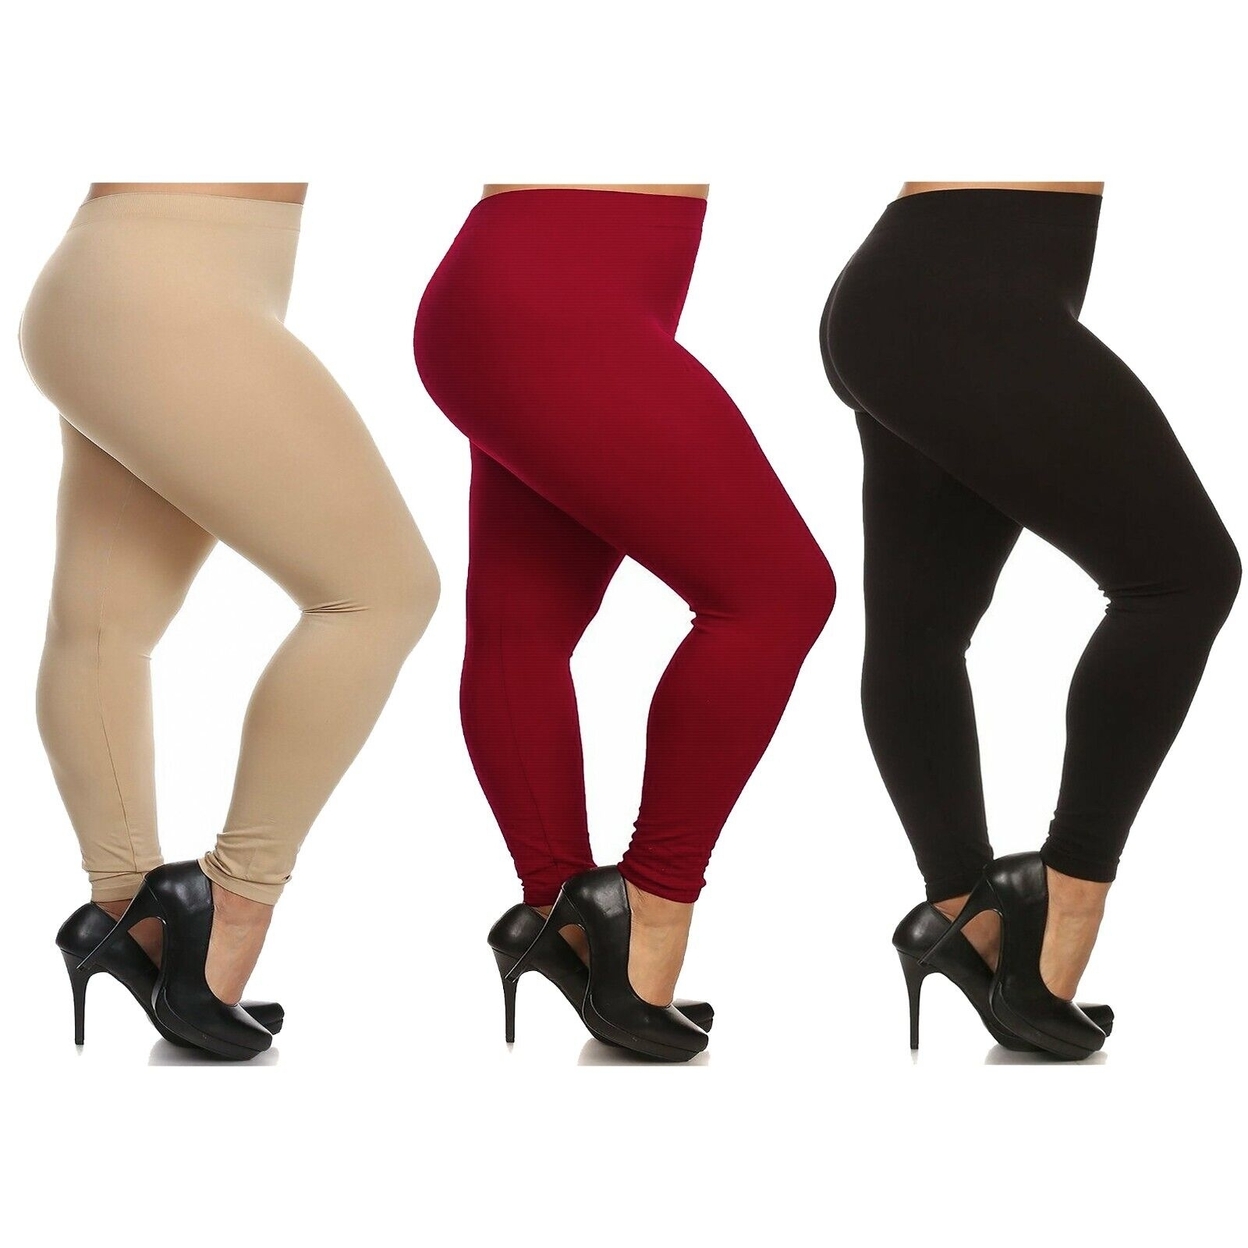 3-Pack: Women's Casual Ultra-Soft Smooth High Waisted Athletic Active Yoga Leggings Plus Size Available - Beige,beige,beige, 3x